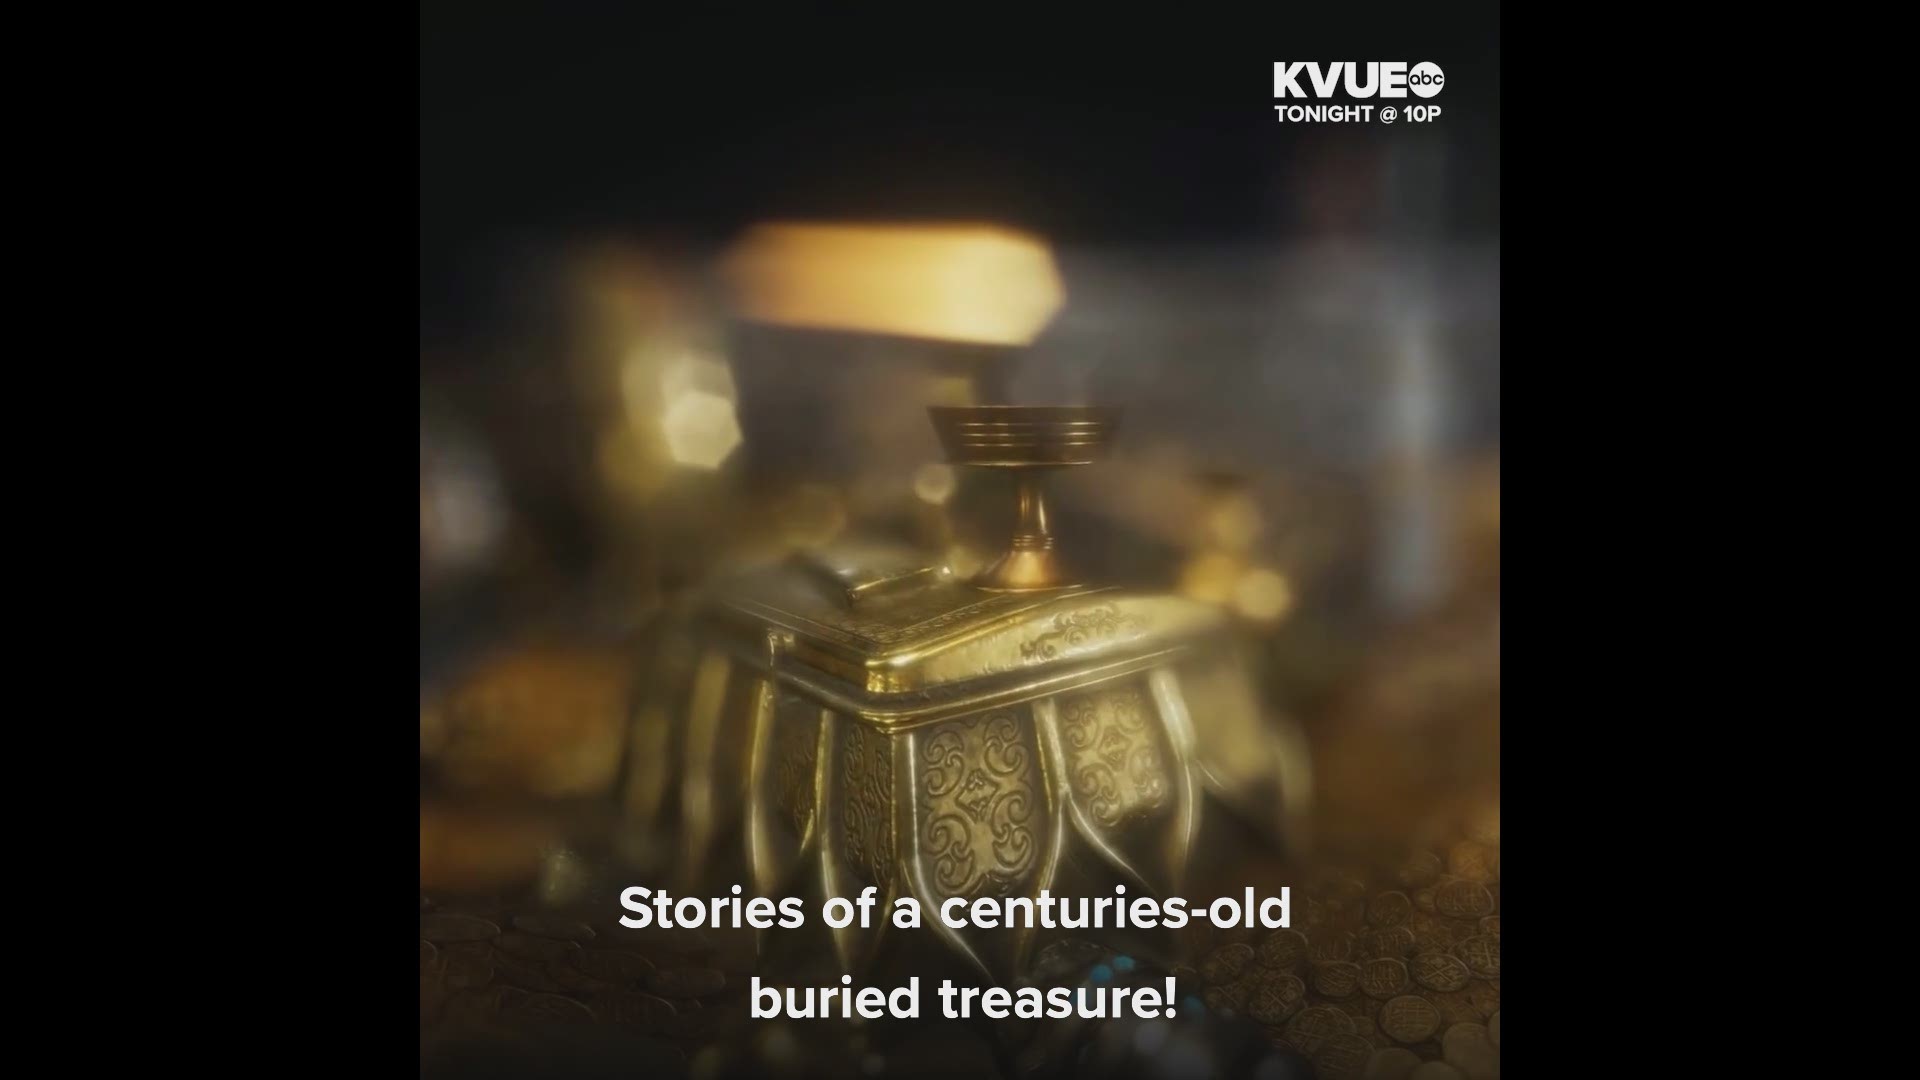 There are rumors of buried treasure along Austin's Shoal Creek. Friday at 10 p.m., we dig into the tales.